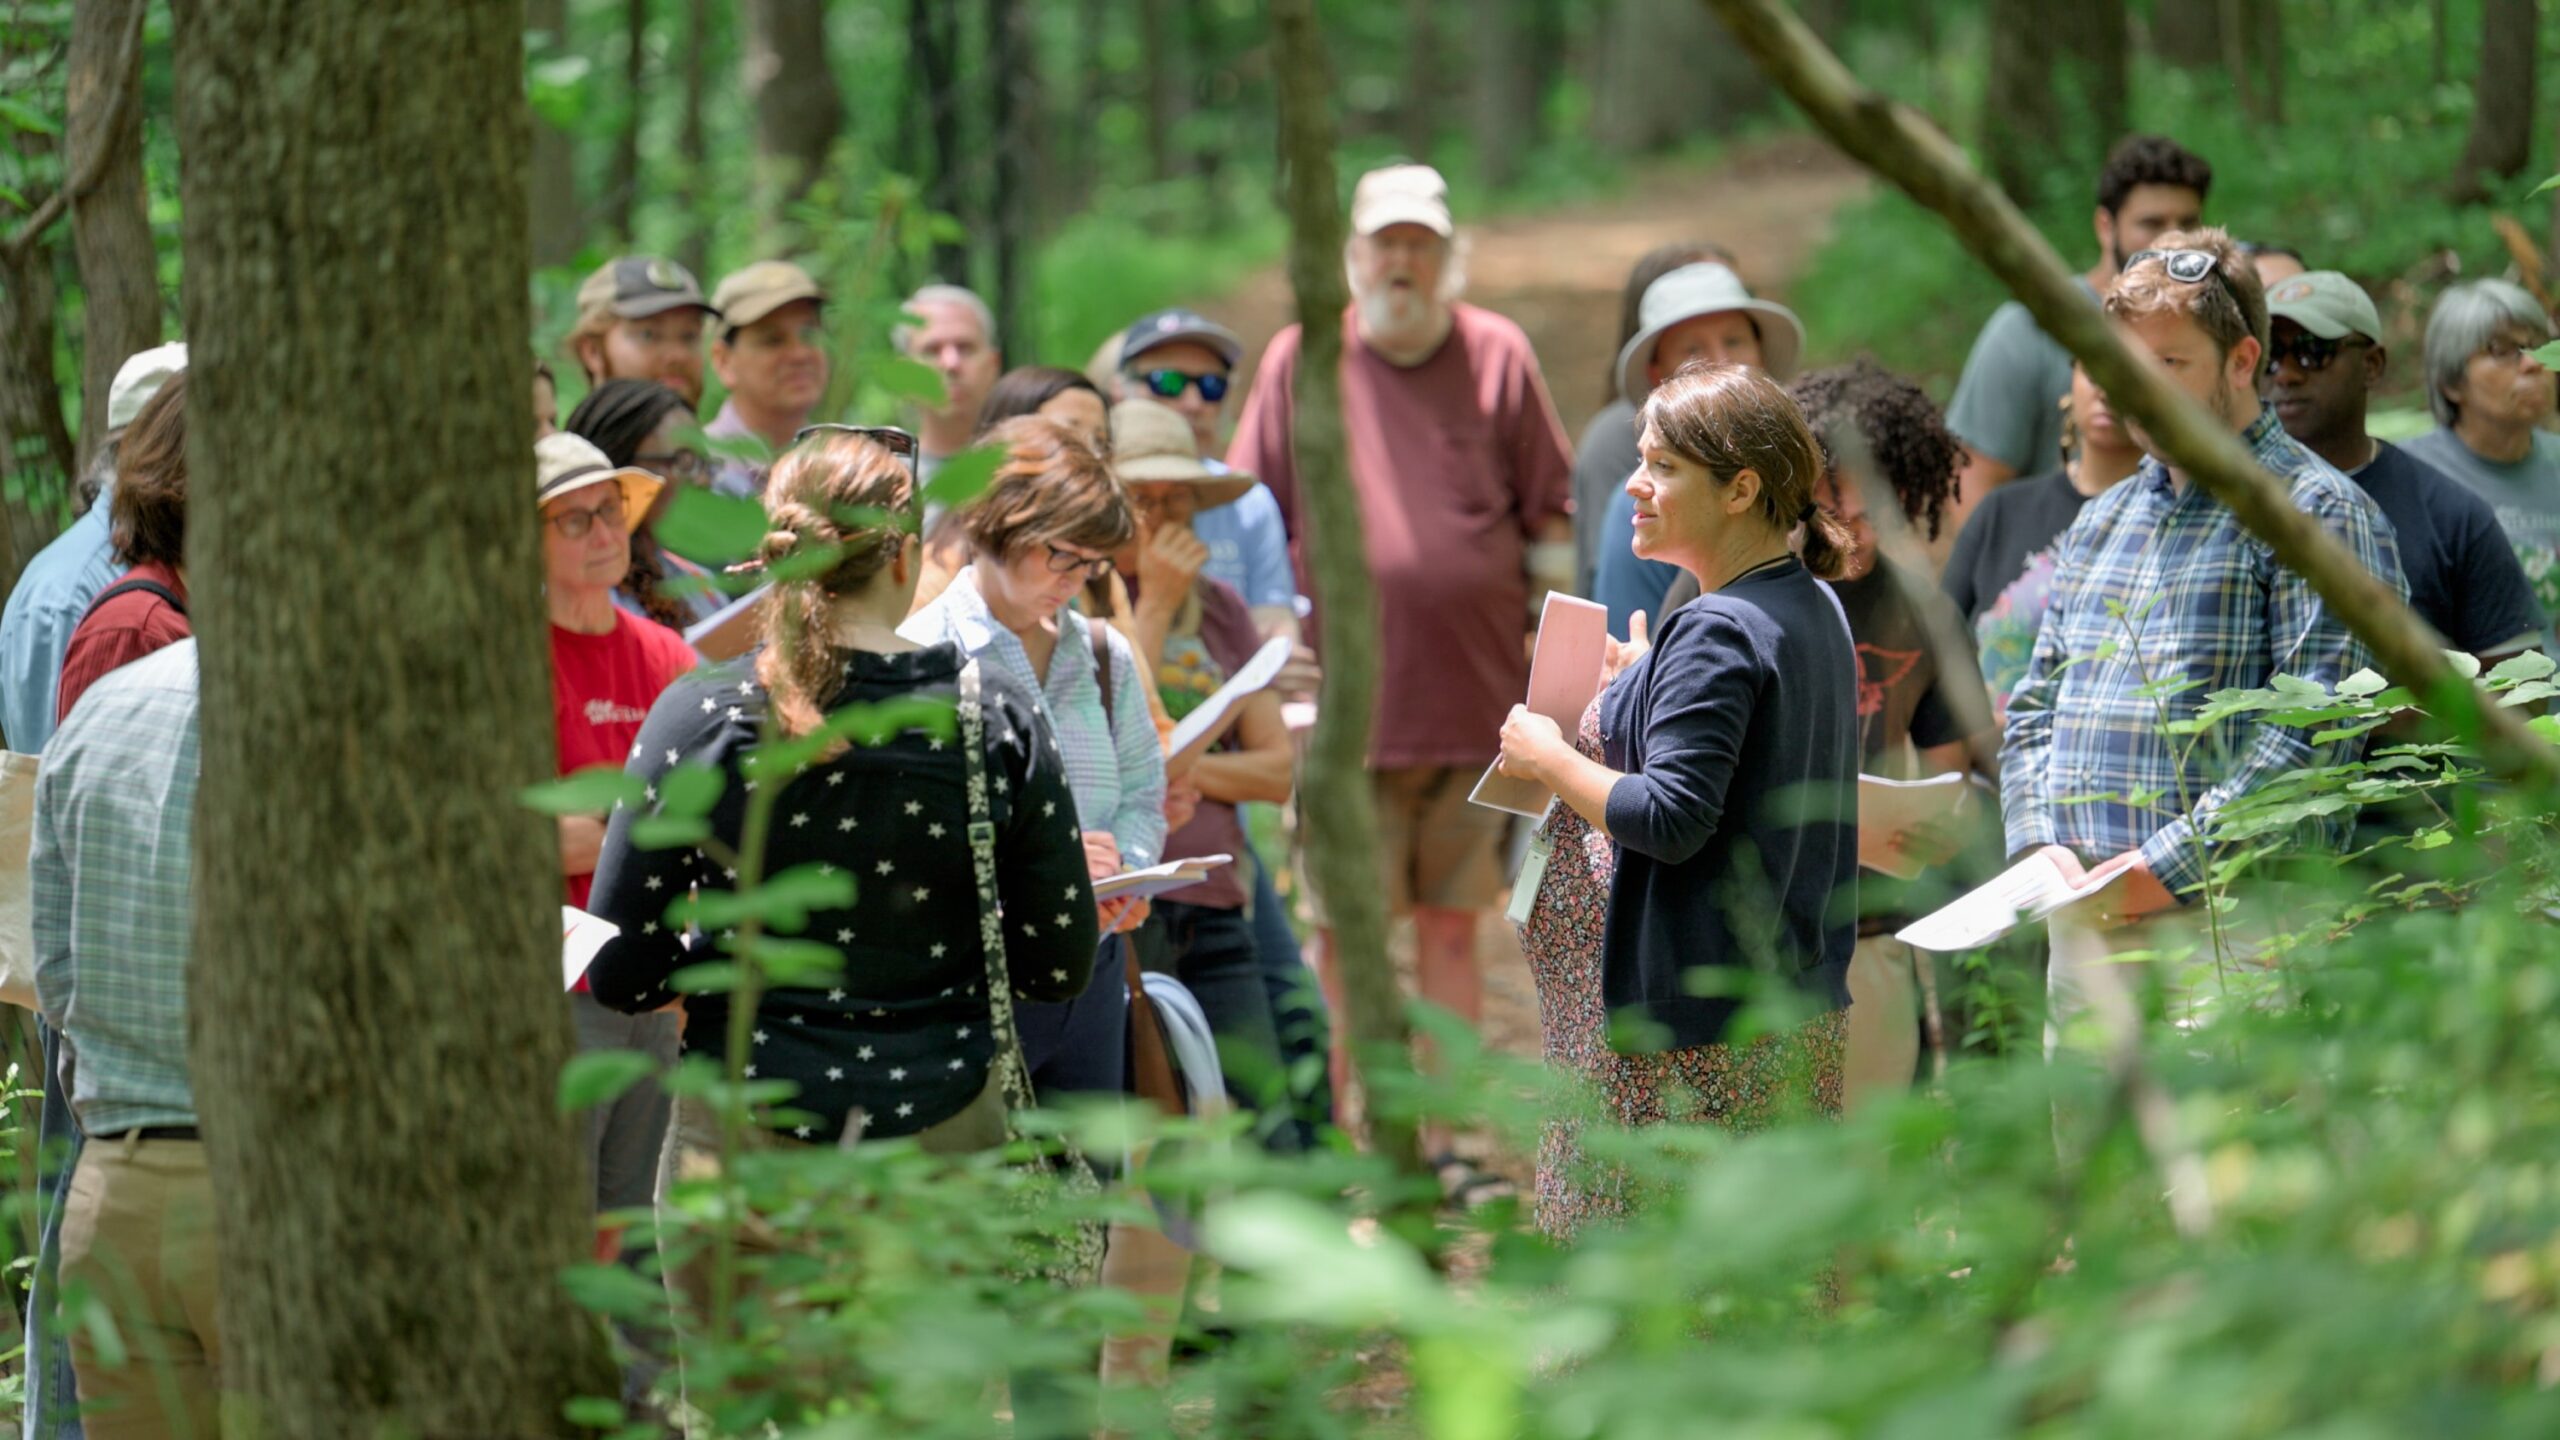 A group of visitors in a forest setting learning about archaeology.